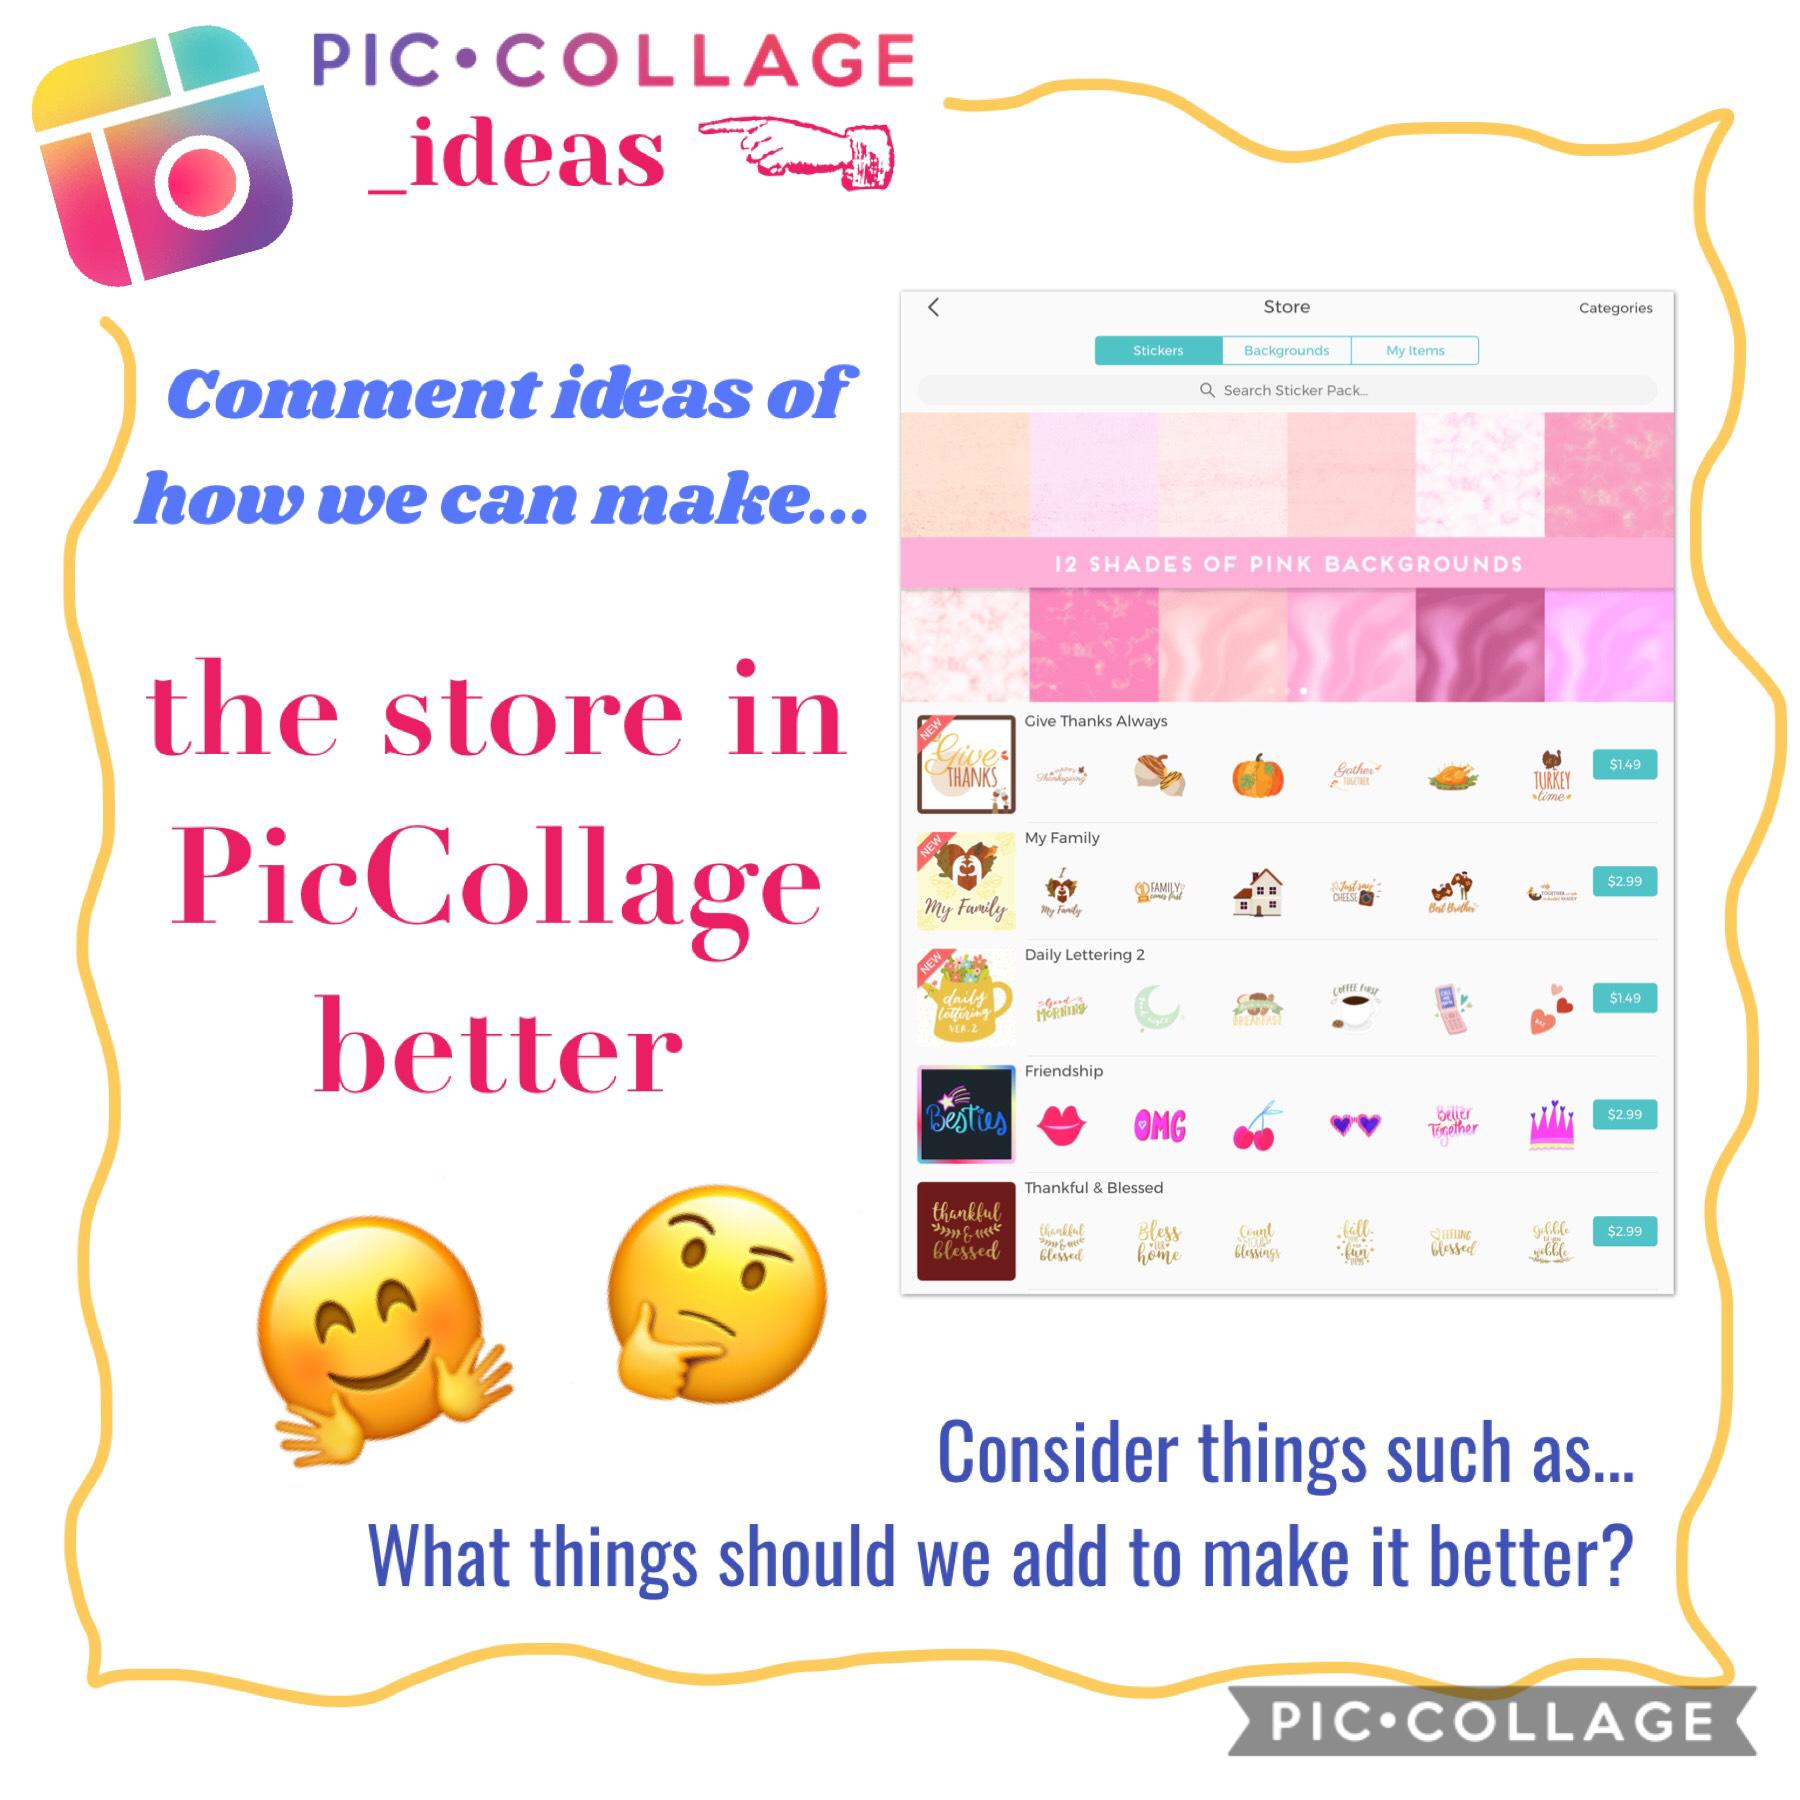 How can we make the store in PicCollage better?